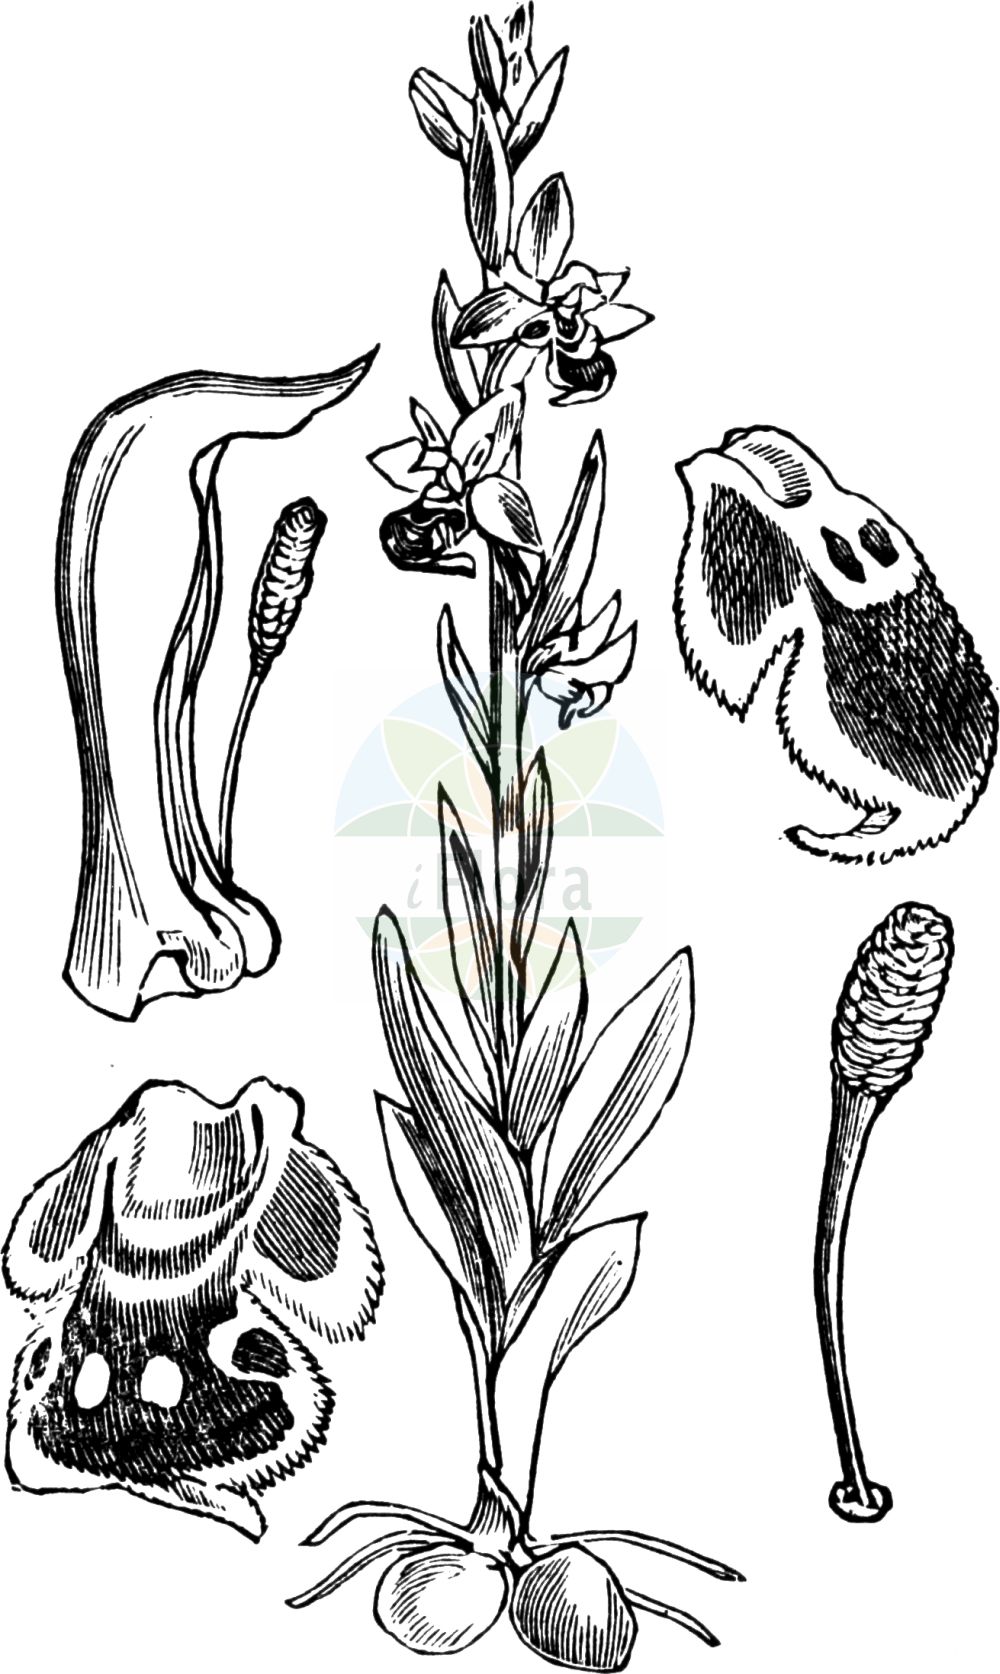 Historische Abbildung von Ophrys apifera (Bienen-Ragwurz - Bee Orchid). Das Bild zeigt Blatt, Bluete, Frucht und Same. ---- Historical Drawing of Ophrys apifera (Bienen-Ragwurz - Bee Orchid). The image is showing leaf, flower, fruit and seed.(Ophrys apifera,Bienen-Ragwurz,Bee Orchid,Arachnites apifera,Ophrys albiflora,Ophrys apifera,Ophrys aquisgranensis,Ophrys asilifera,Ophrys austriaca,Ophrys bicolor,Ophrys botteronii,Ophrys chlorantha,Ophrys epeirophora,Ophrys friburgensis,Ophrys immaculata,Ophrys integra,Ophrys jurana,Ophrys mangini,Ophrys purpurea,Ophrys ripaensis,Ophrys rostrata,Ophrys saraepontana,Ophrys trollii,Orchis apifera,Orchis holosericea,Orchis oestrifera,Bienen-Ragwurz,Bee Orchid,Ophrys,Ragwurz,Bee Orchid,Orchidaceae,Knabenkrautgewächse,Orchid family,Blatt,Bluete,Frucht,Same,leaf,flower,fruit,seed,Fitch et al. (1880))